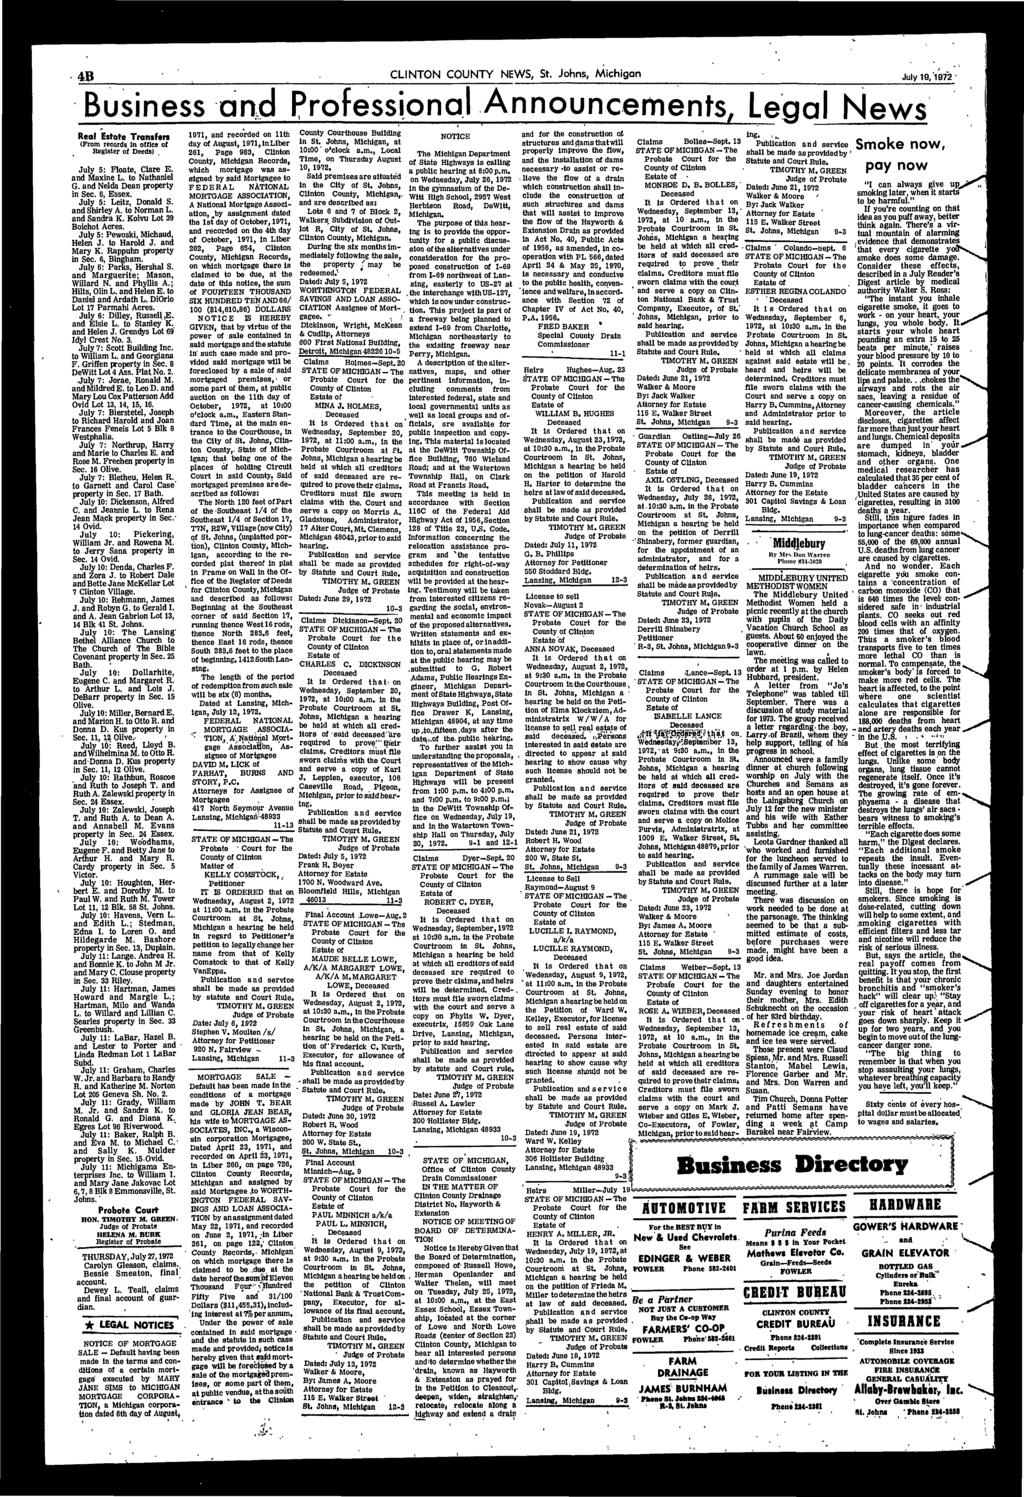 4B CLINTON COUNTY NEWS, St. Johns, Mchgan July 19/1972 Busness and Professonal Announcements, Legal News Real Estate Transfers (Prom records In offce of Regster of Deeds July 5: Floate, Clare E.